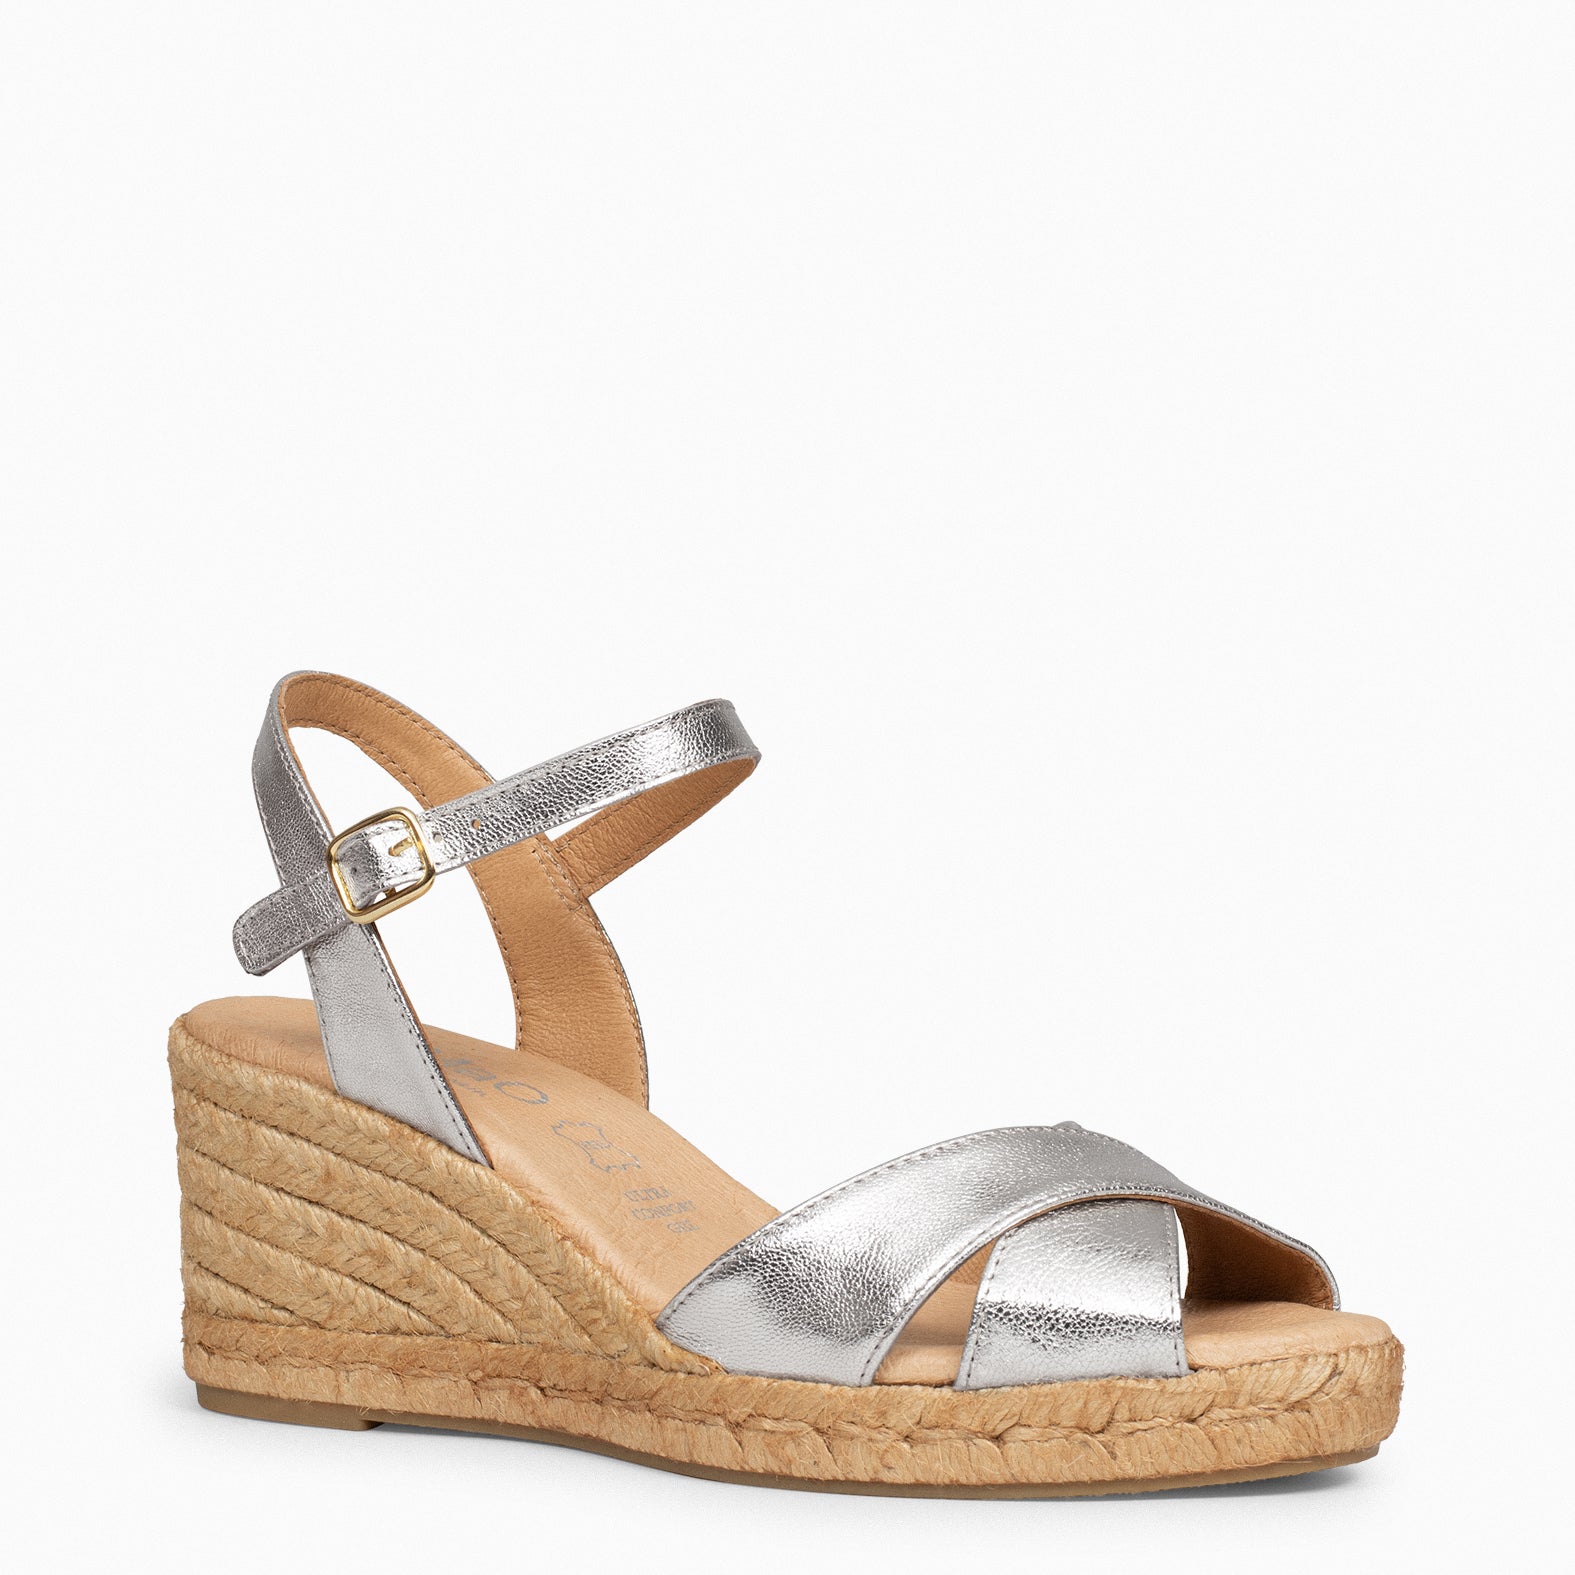 CALPE – SILVER suede leather espadrille